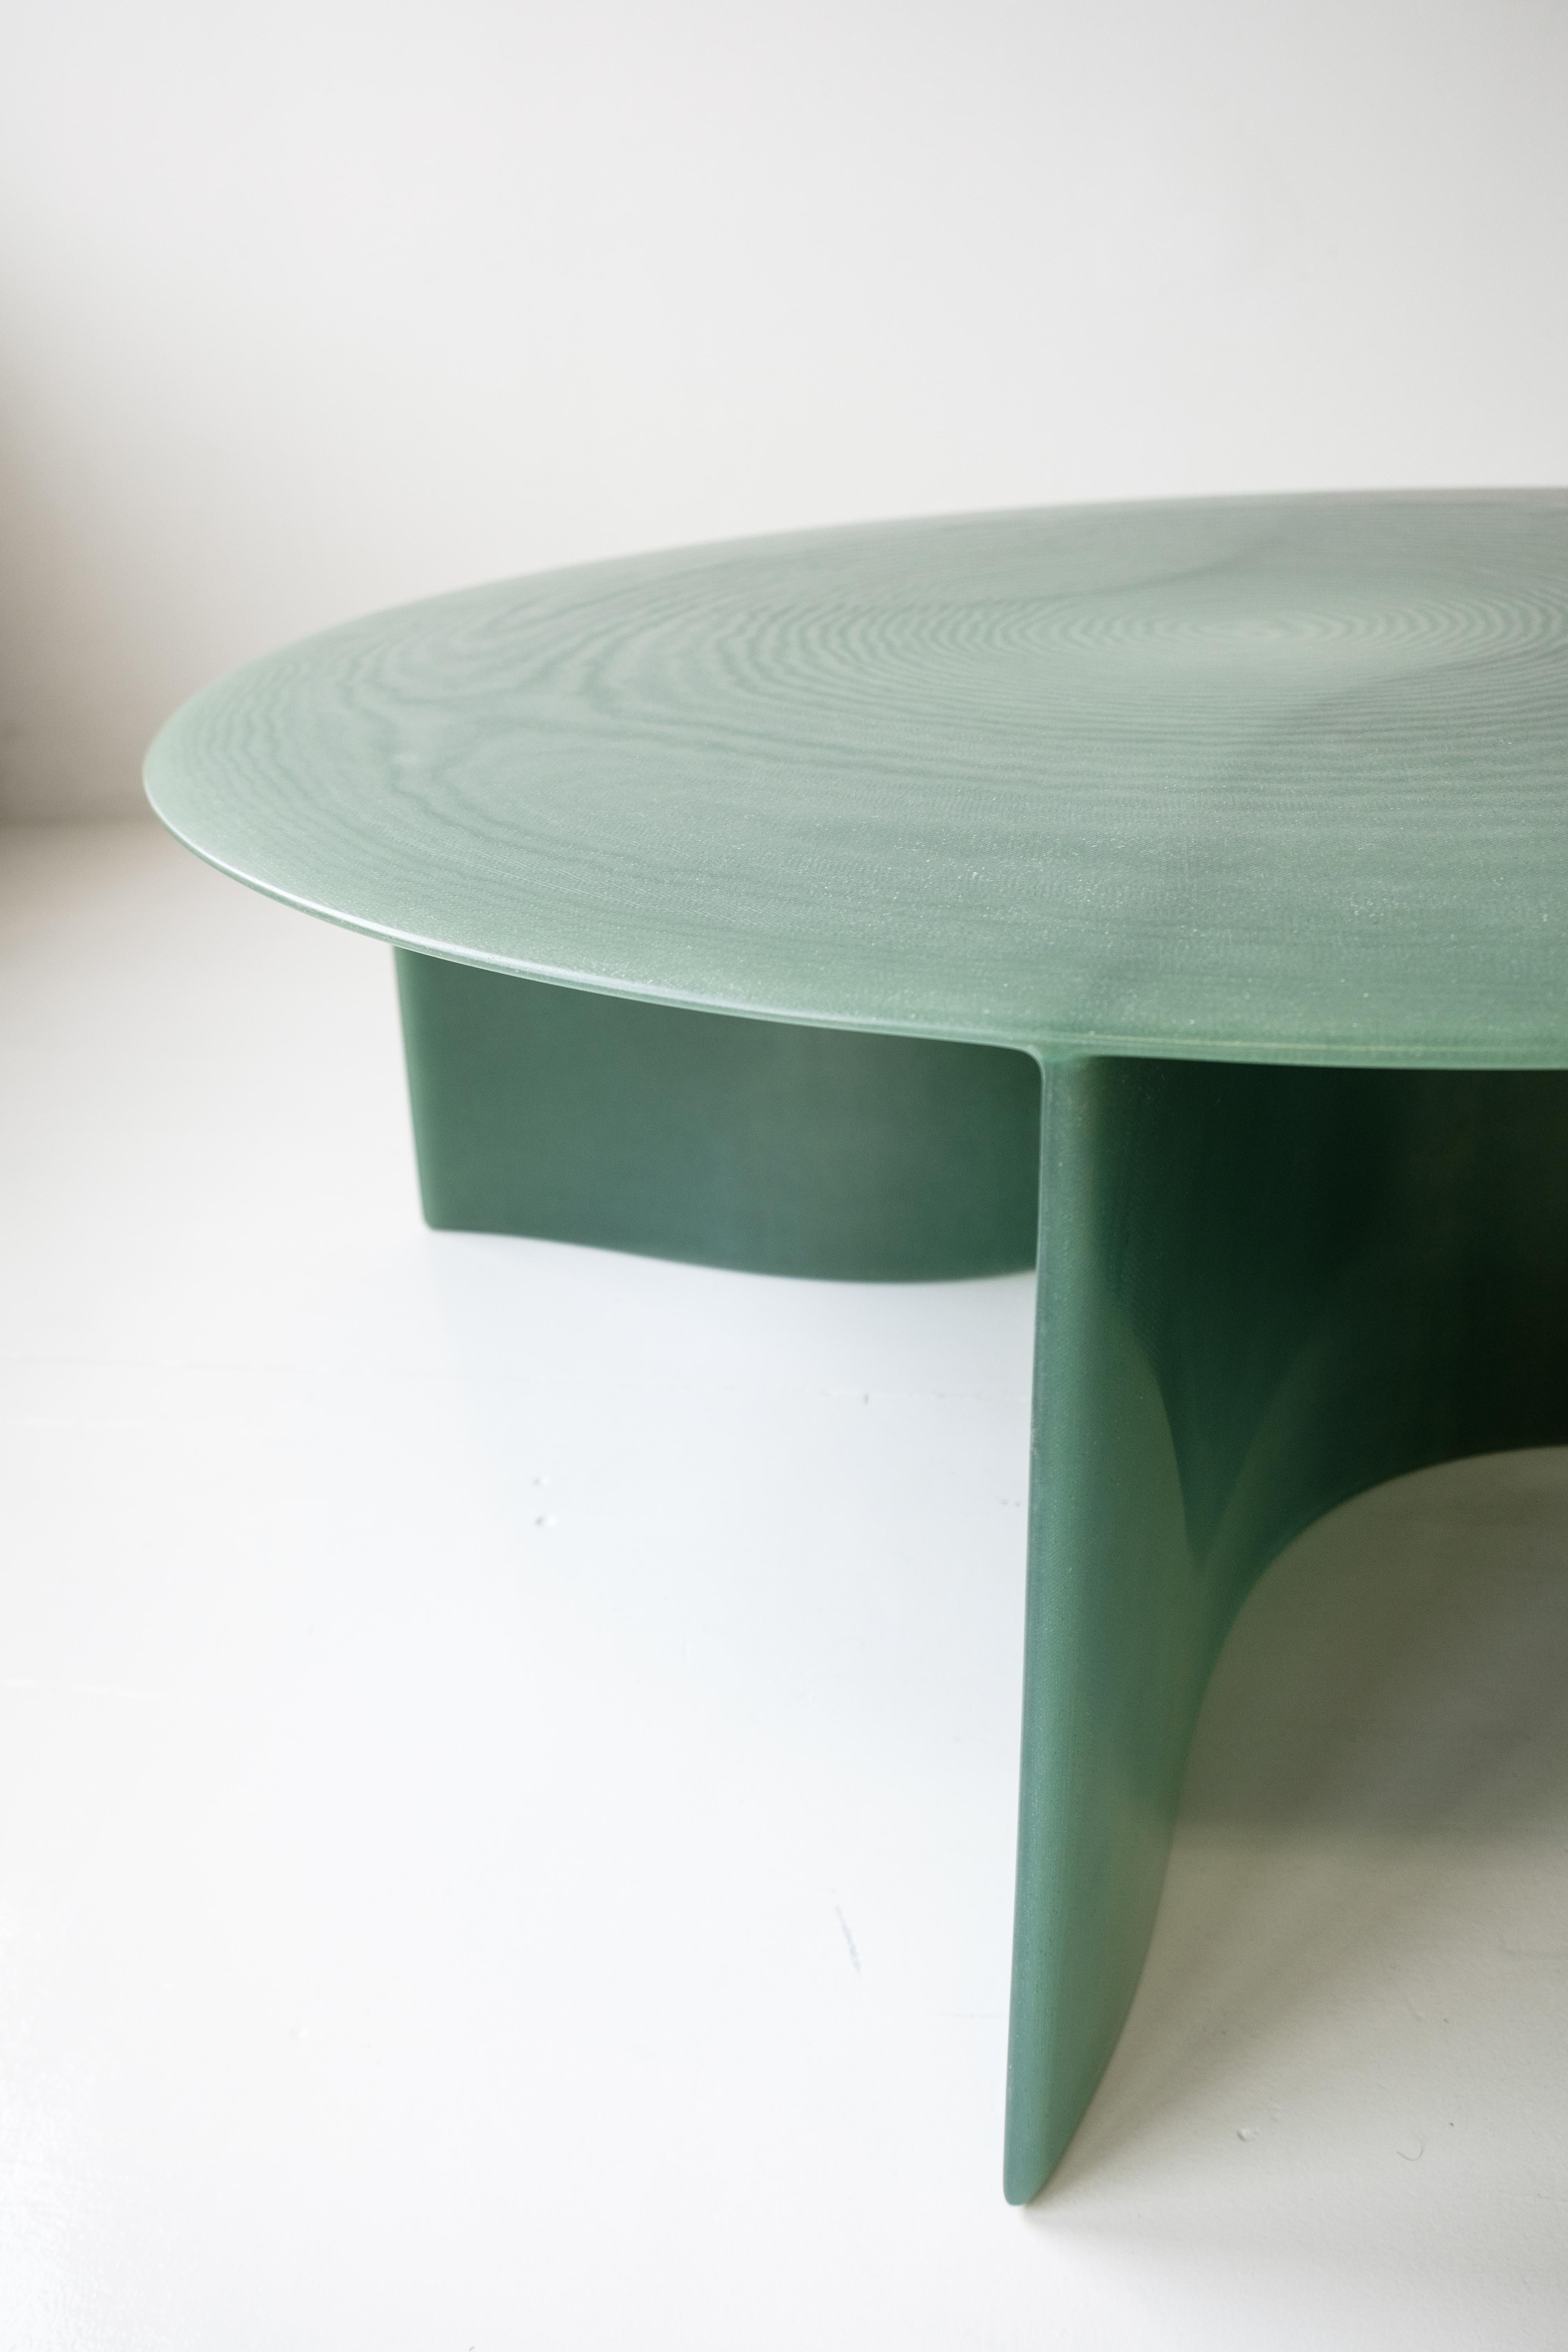 Resin Contemporary Green Fiberglass, New Wave Coffee Table Round 120cm, by Lukas Cober For Sale